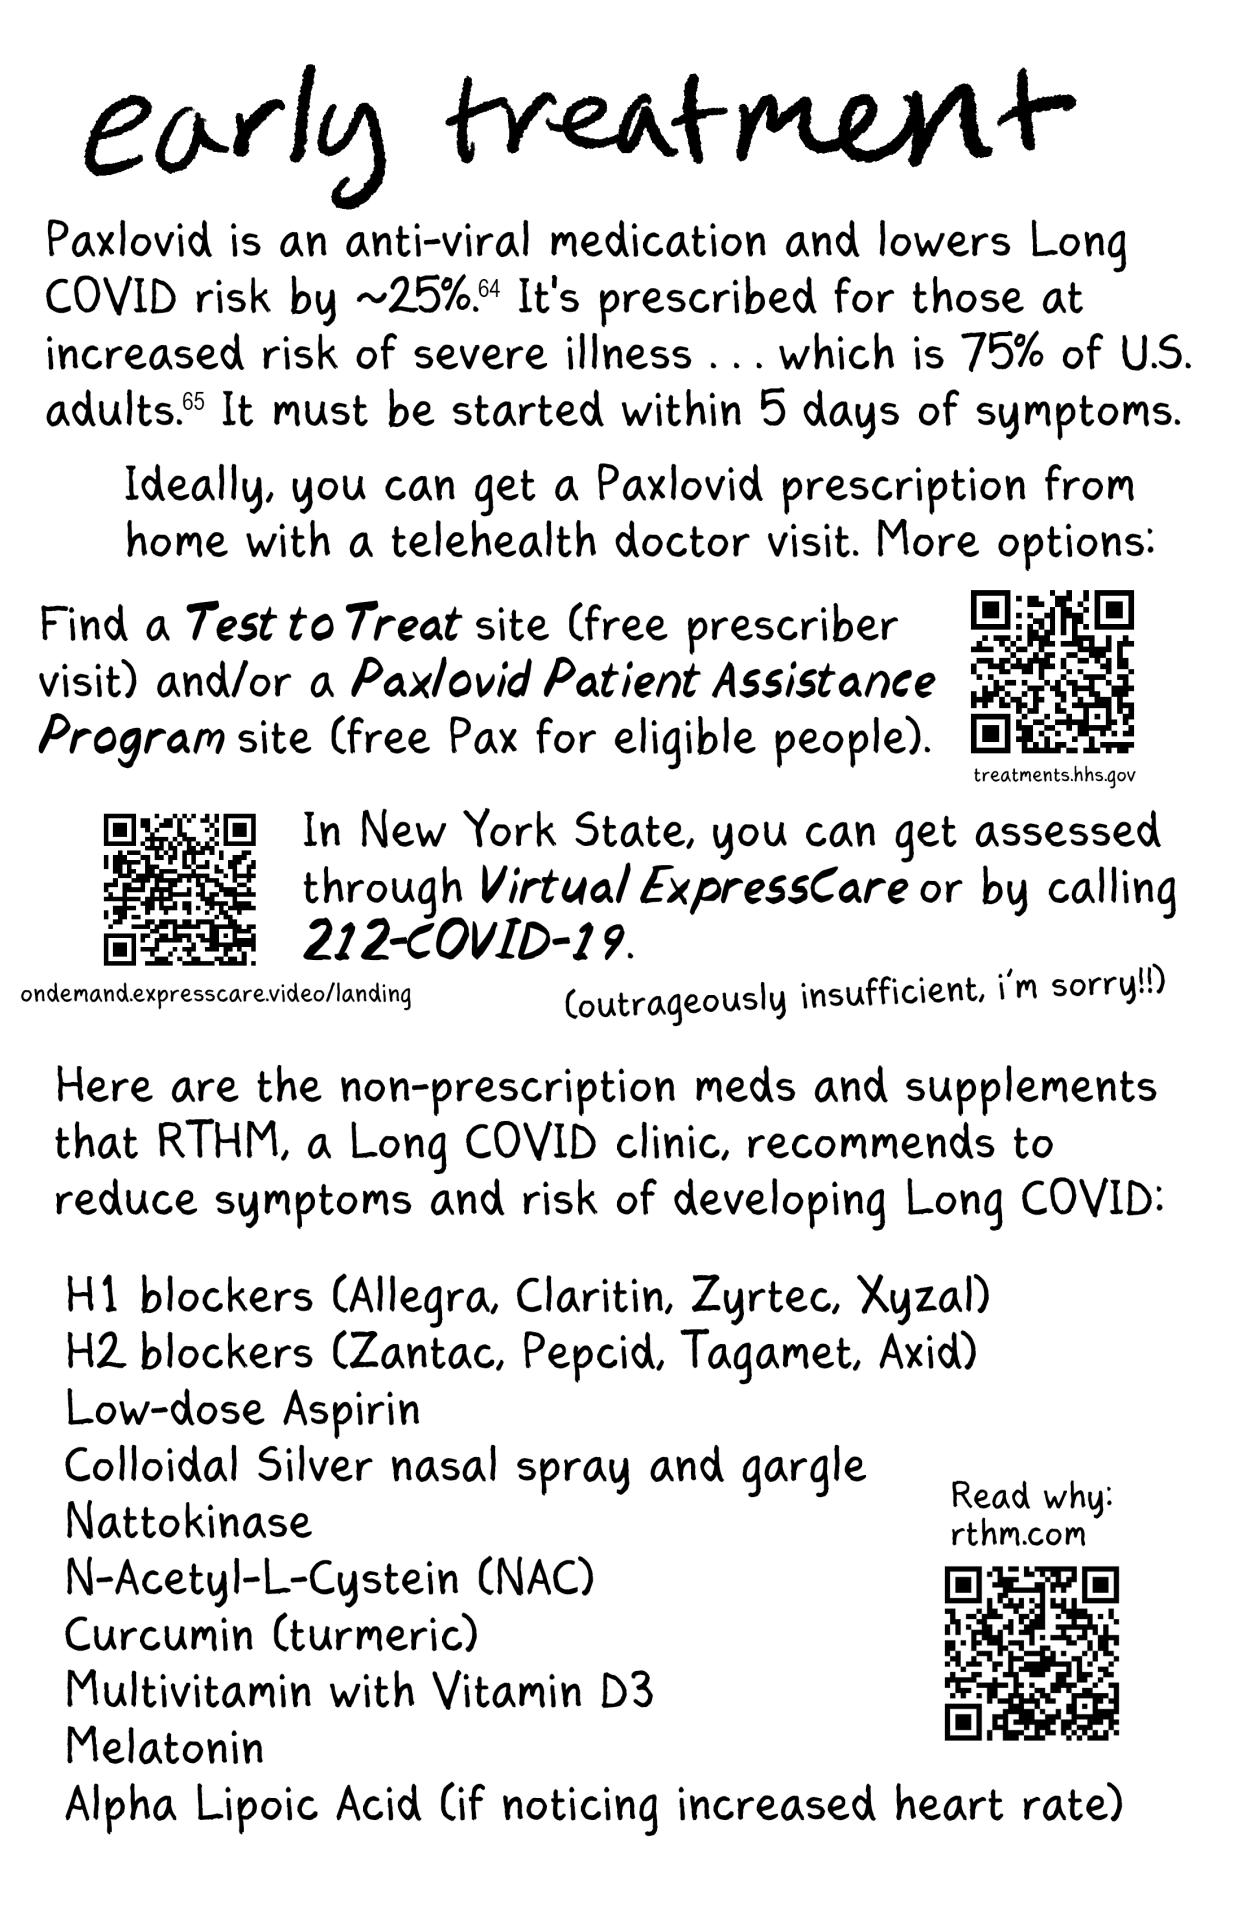 COVID zine page 14  [bold] Early Treatment  Paxlovid is an anti-viral medication and lowers Long COVID risk by ~25%. It's prescribed for those at increased risk of severe illness...which is 75% of U.S. adults. It must be started within 5 days of symptoms.  Ideally, you can get a Paxlovid prescription from home with a telehealth doctor visit. More options:  Find a Test to Treat site (free prescriber visit) and/or a Paxlovid Patient Assistance Program site (free Pax for eligible people). treatments.hhs.gov [QR code]  In New York State, you can get assessed through Virtual ExpressCare or by calling 212-COVID-19 . ondemand.expresscare.video/landing [QR code]  [smaller] (outrageously insufficient, i'm sorry!!)  Here are the non-prescription meds and supplements that RTHM, a Long COVID clinic, recommends to reduce symptoms and risk of developing Long COVID:  H1 blockers  H2 blockers  Low-dose aspirin colloidal silver nasal spray and gargle Nattokinase N-Acetyl-L-Cystein (NAC) Curcumin (turmeric) Multivitamin with Vitamin D3 Melatonin Alpha Lipoic Acid (if noticing increased heart rate)  Read why: rthm.com [QR code]